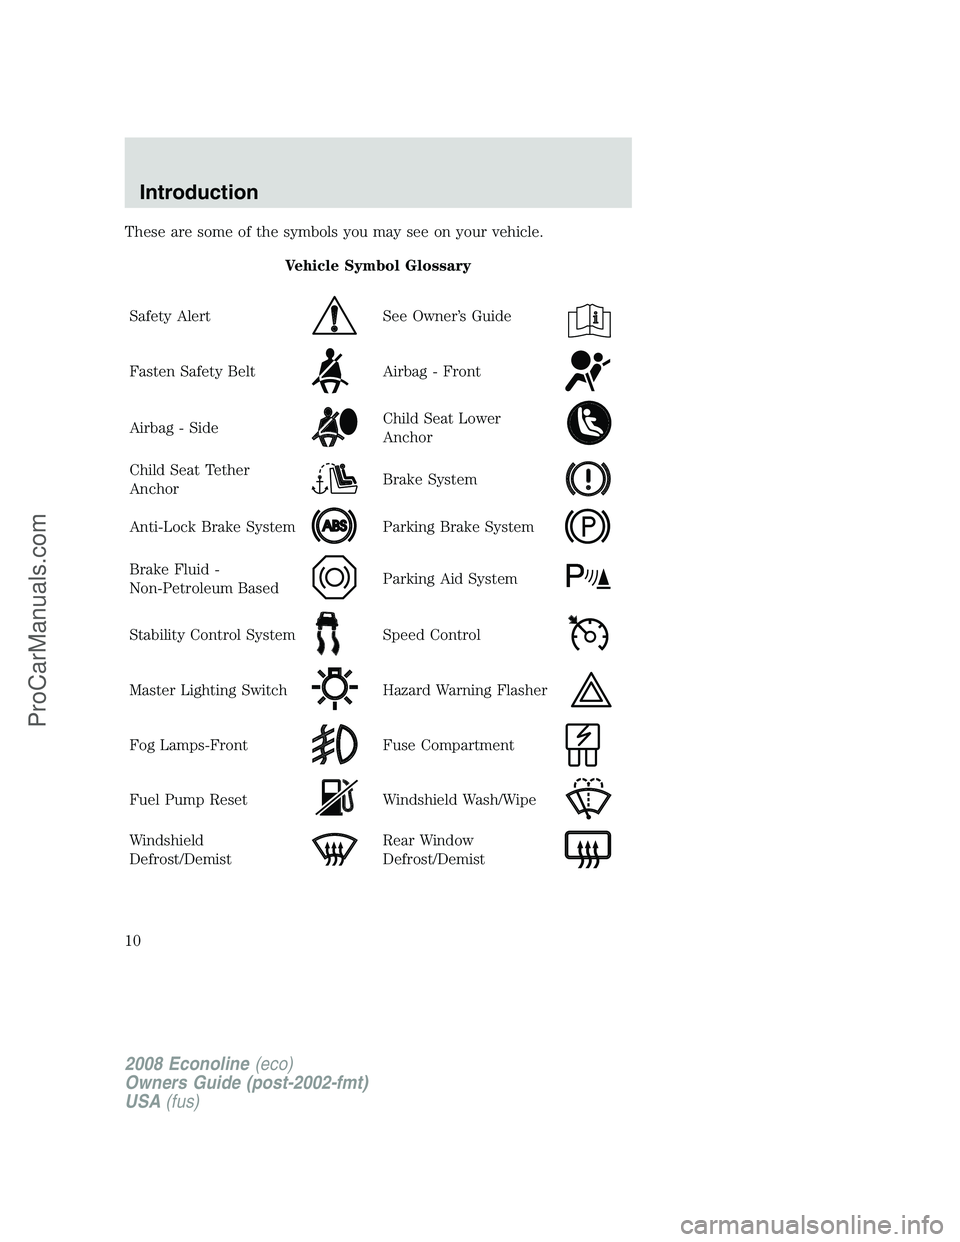 FORD E-450 2008  Owners Manual These are some of the symbols you may see on your vehicle.
Vehicle Symbol Glossary
Safety Alert
See Owner’s Guide
Fasten Safety BeltAirbag - Front
Airbag - SideChild Seat Lower
Anchor
Child Seat Tet